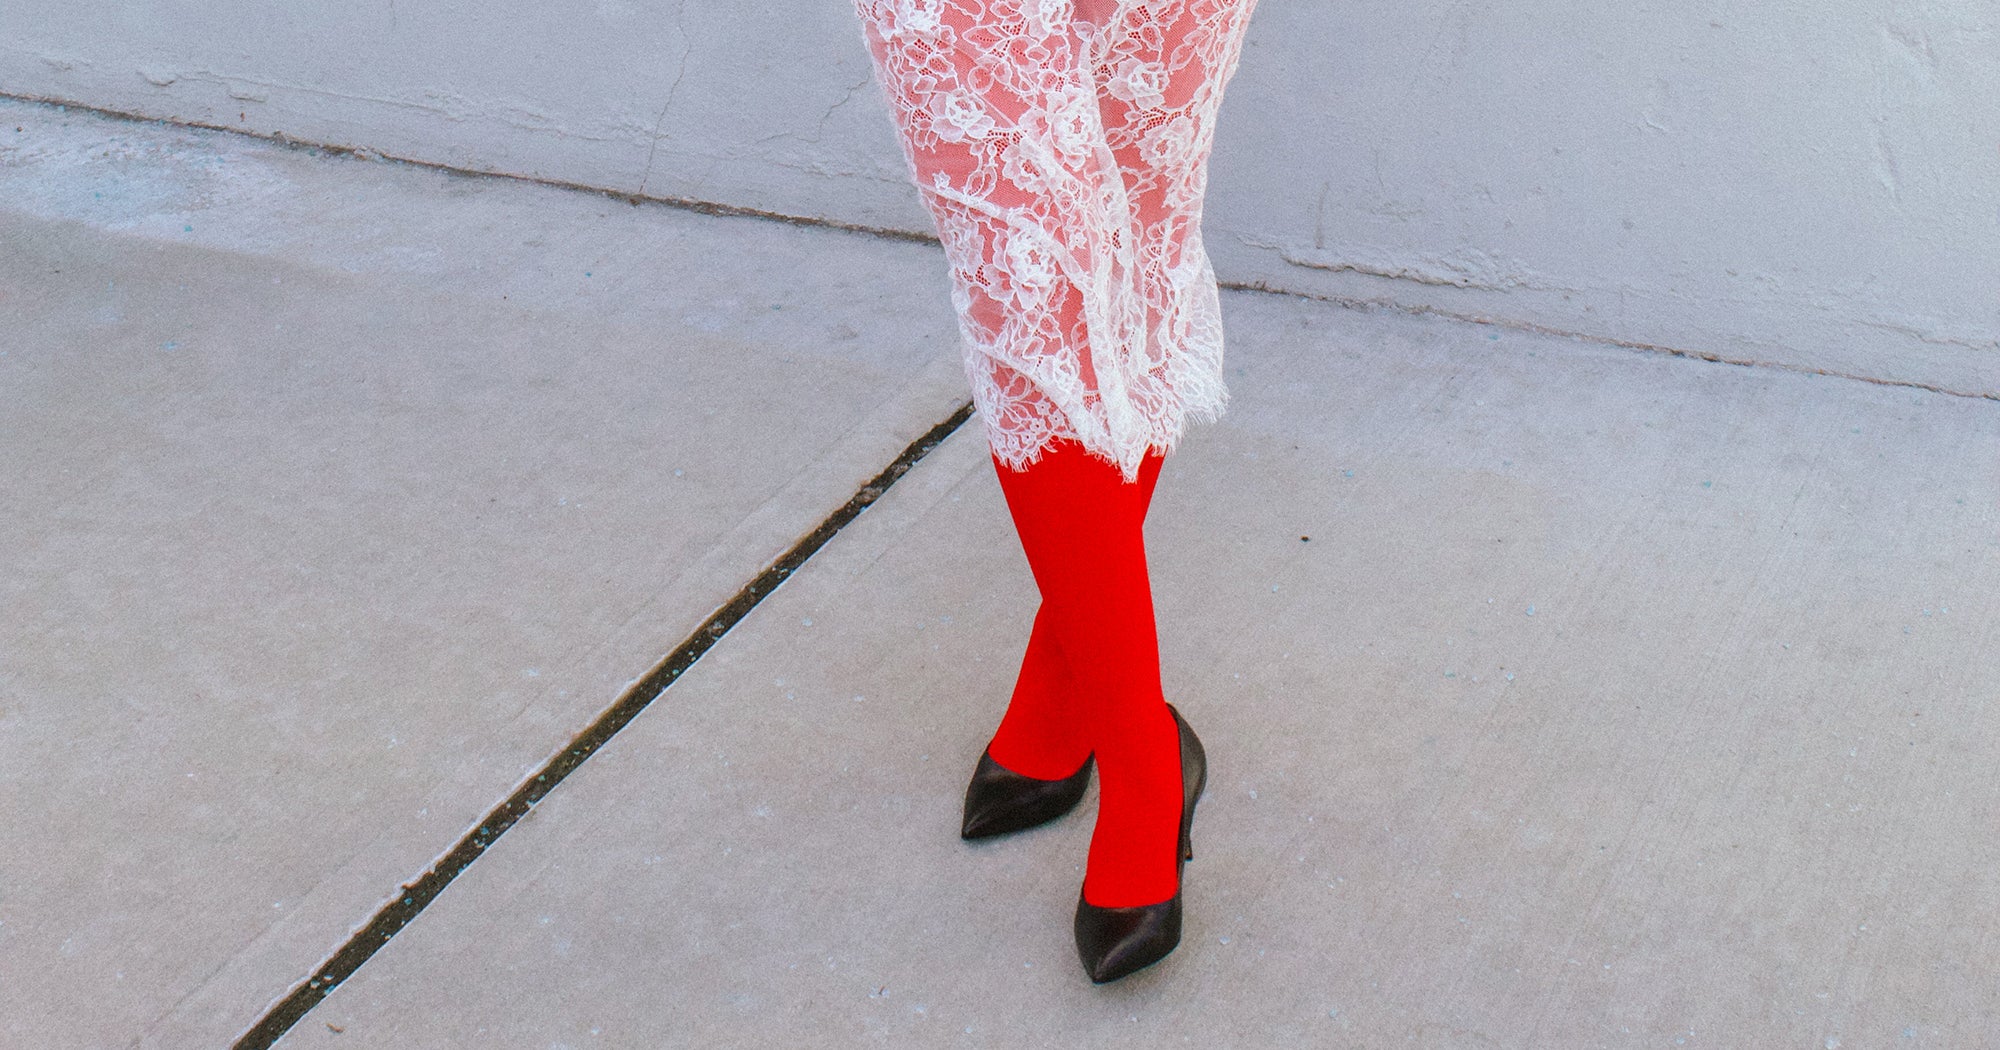 Snag Tights - Classic autumn dressing here from